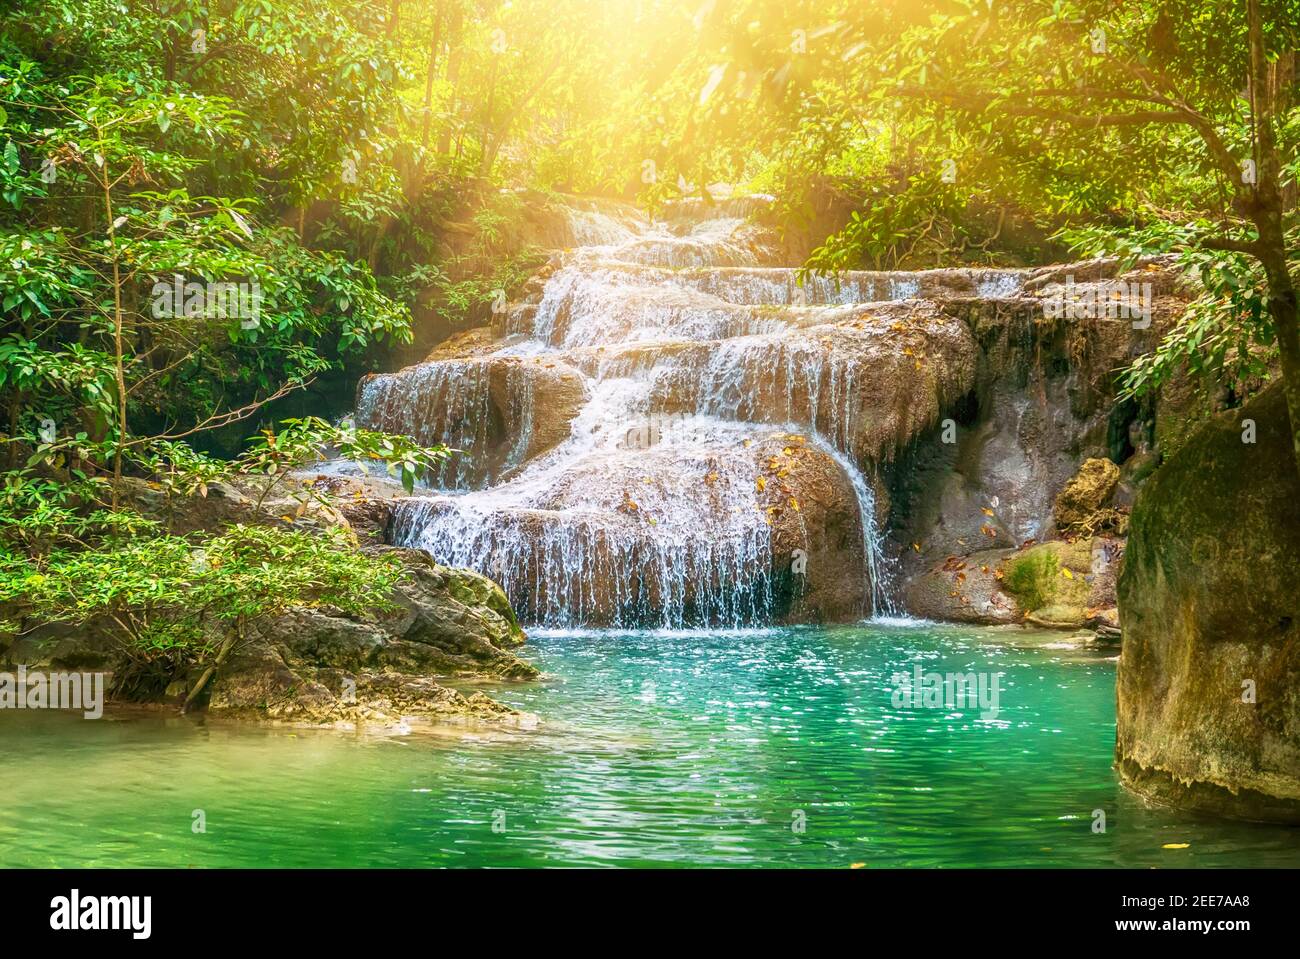 Forest and waterfall at Ton Nga Chang Waterfall, Erawan, Songkhla, Thailand. Tourustic attraction and famous sightseeng, natural outdoor jungles landscape Stock Photo